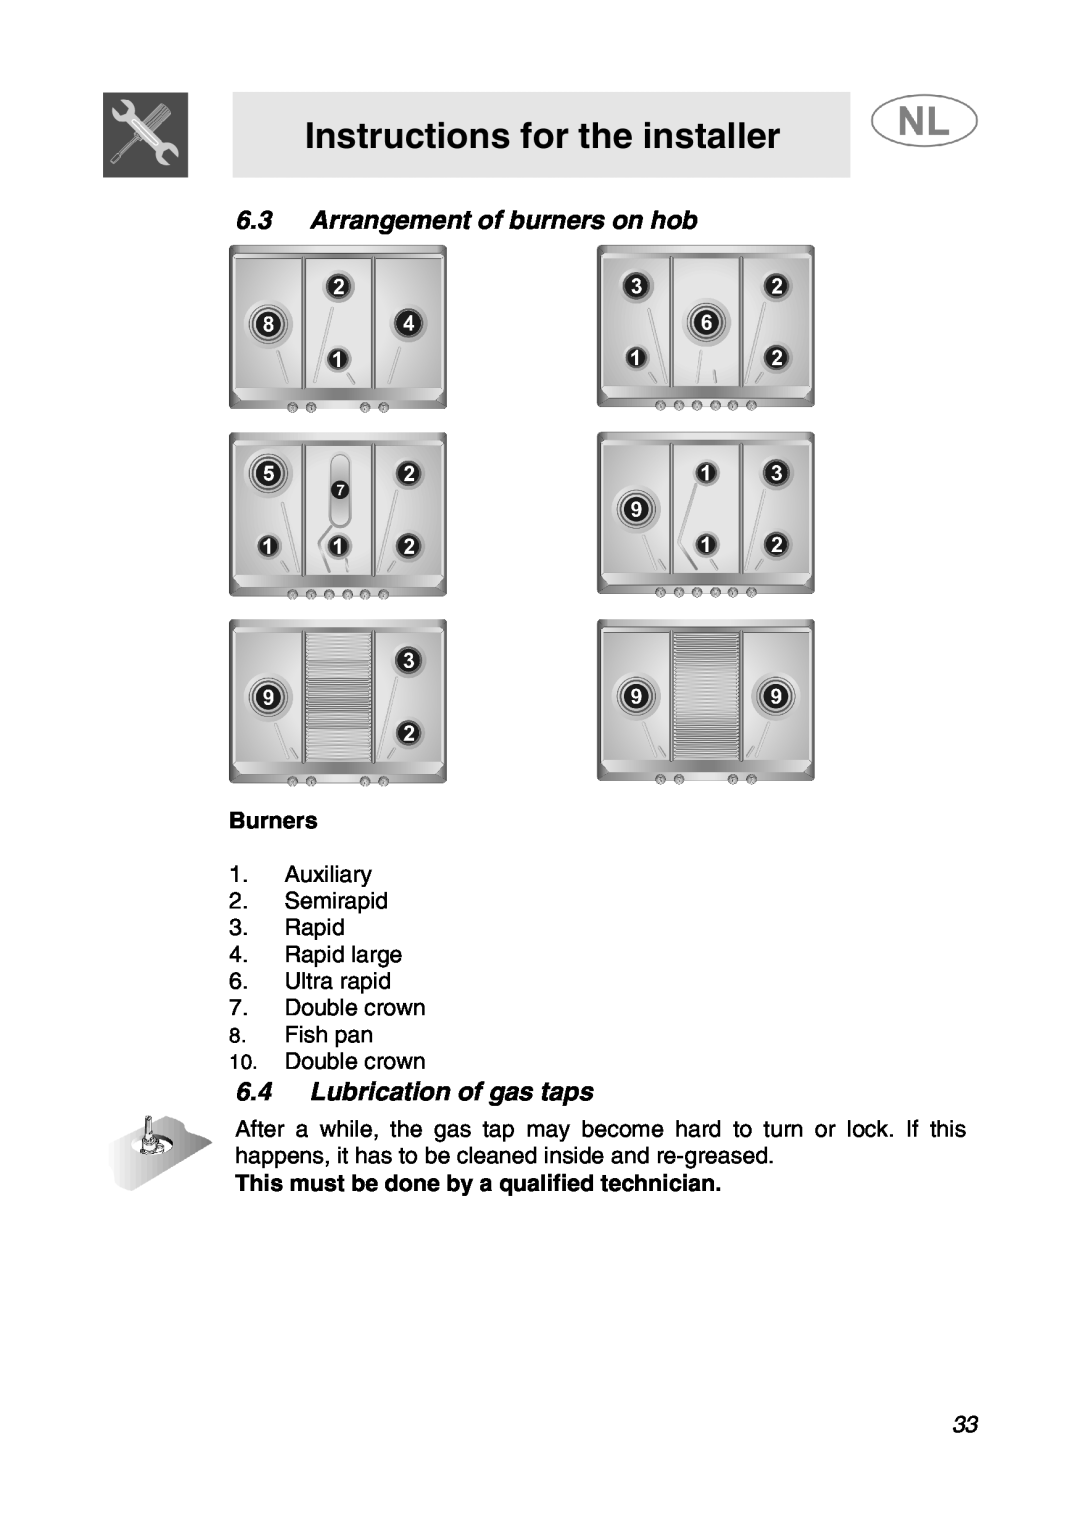 Smeg SNL574GH manual Arrangement of burners on hob, Lubrication of gas taps, Instructions for the installer, Burners 